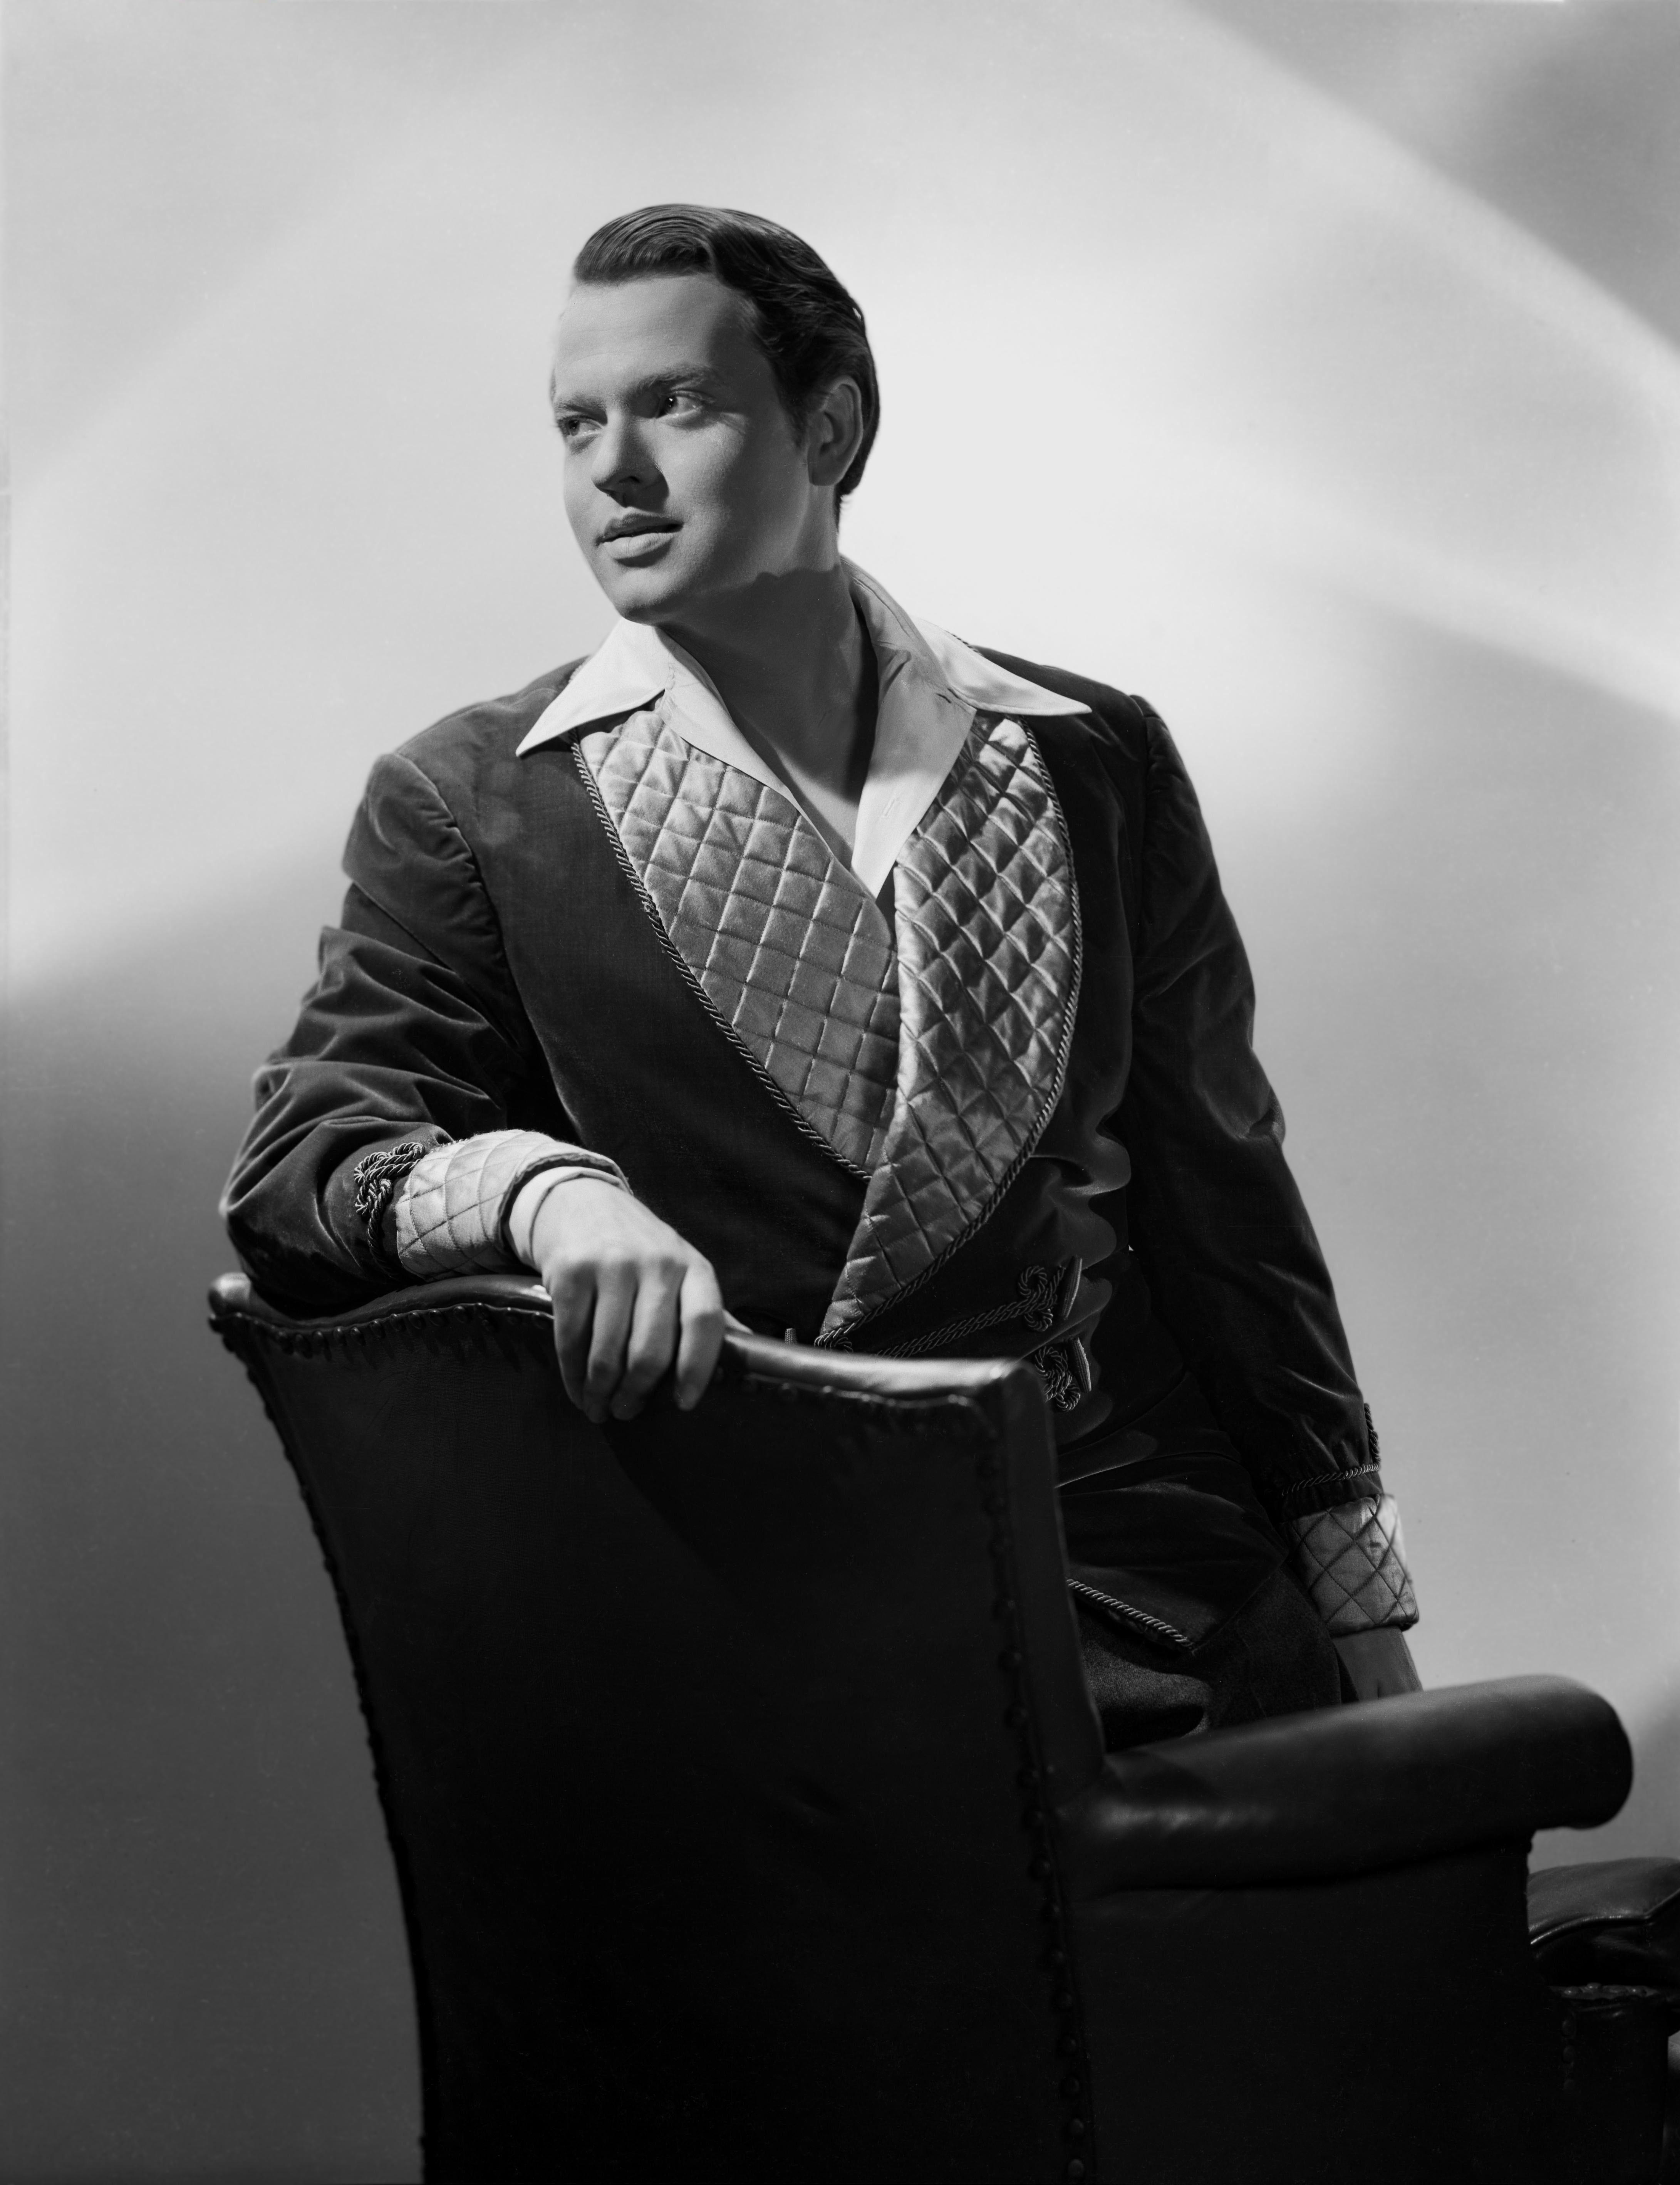 Unknown Black and White Photograph – Orson Welles Posed in Smoking Jacket Movie Star News Fine Art Print